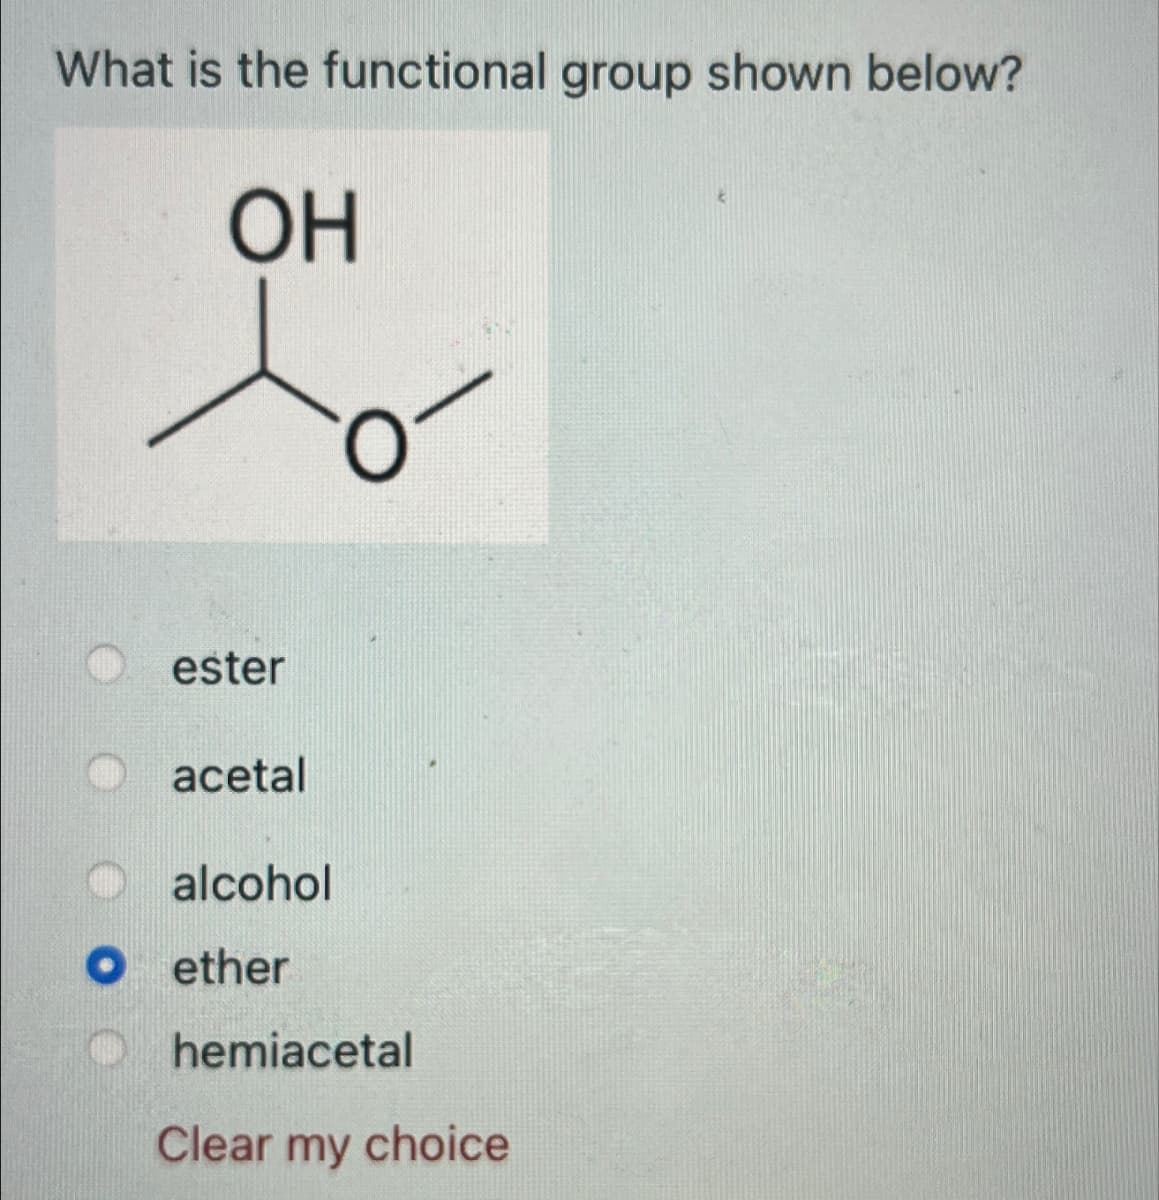 What is the functional group shown below?
OH
ester
acetal
alcohol
• ether
hemiacetal
Clear my choice